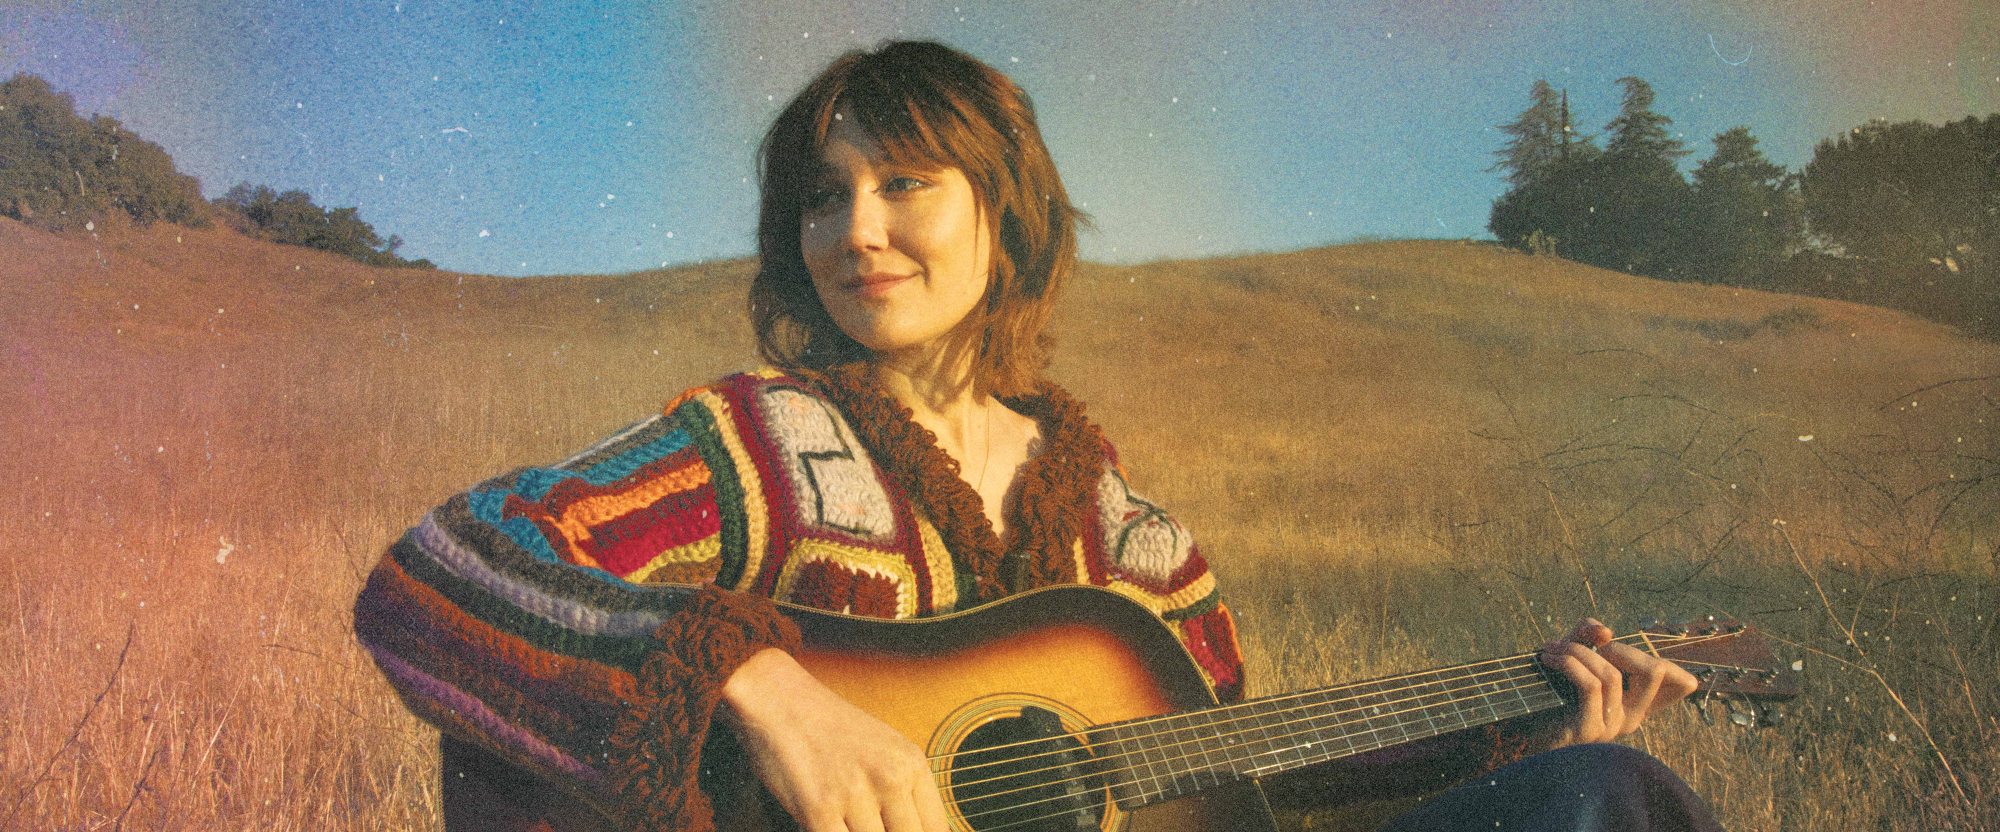 14 Songwriting Tips from Music’s Biggest Names—Molly Tuttle, Wolf Alice, Five For Fighting, and More